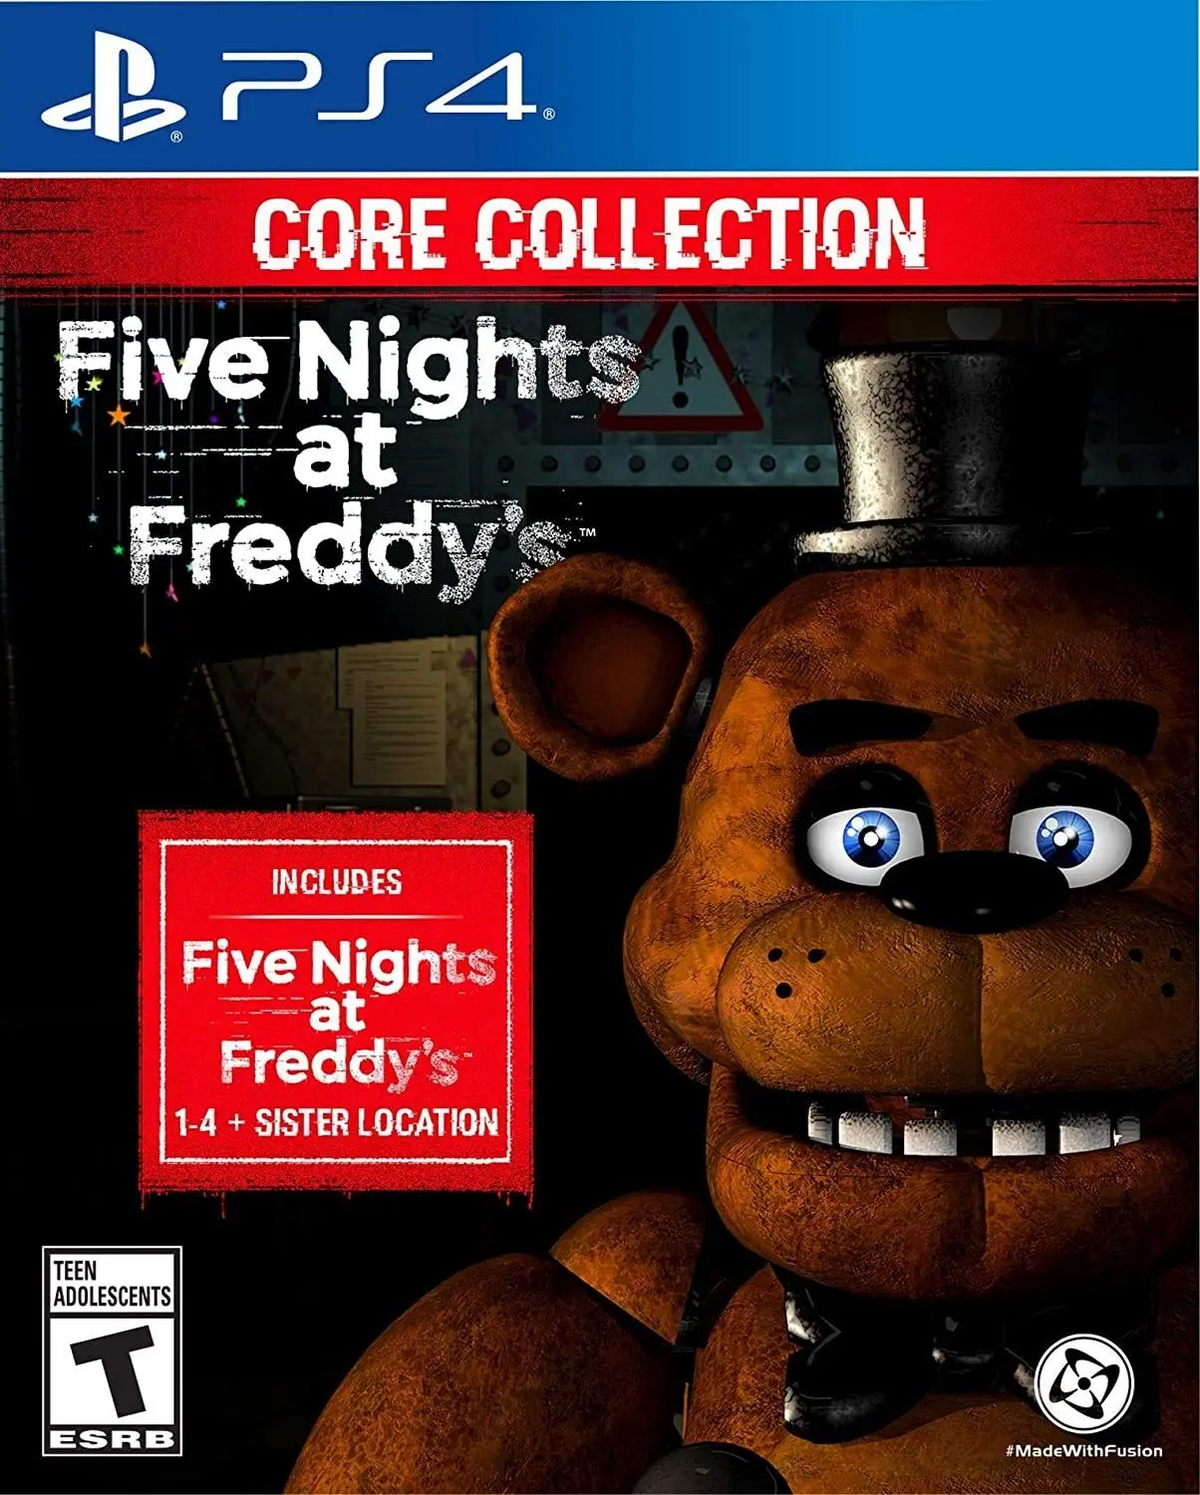 Five Nights at Freddy's: Security Breach physical editions release today  for Nintendo Switch